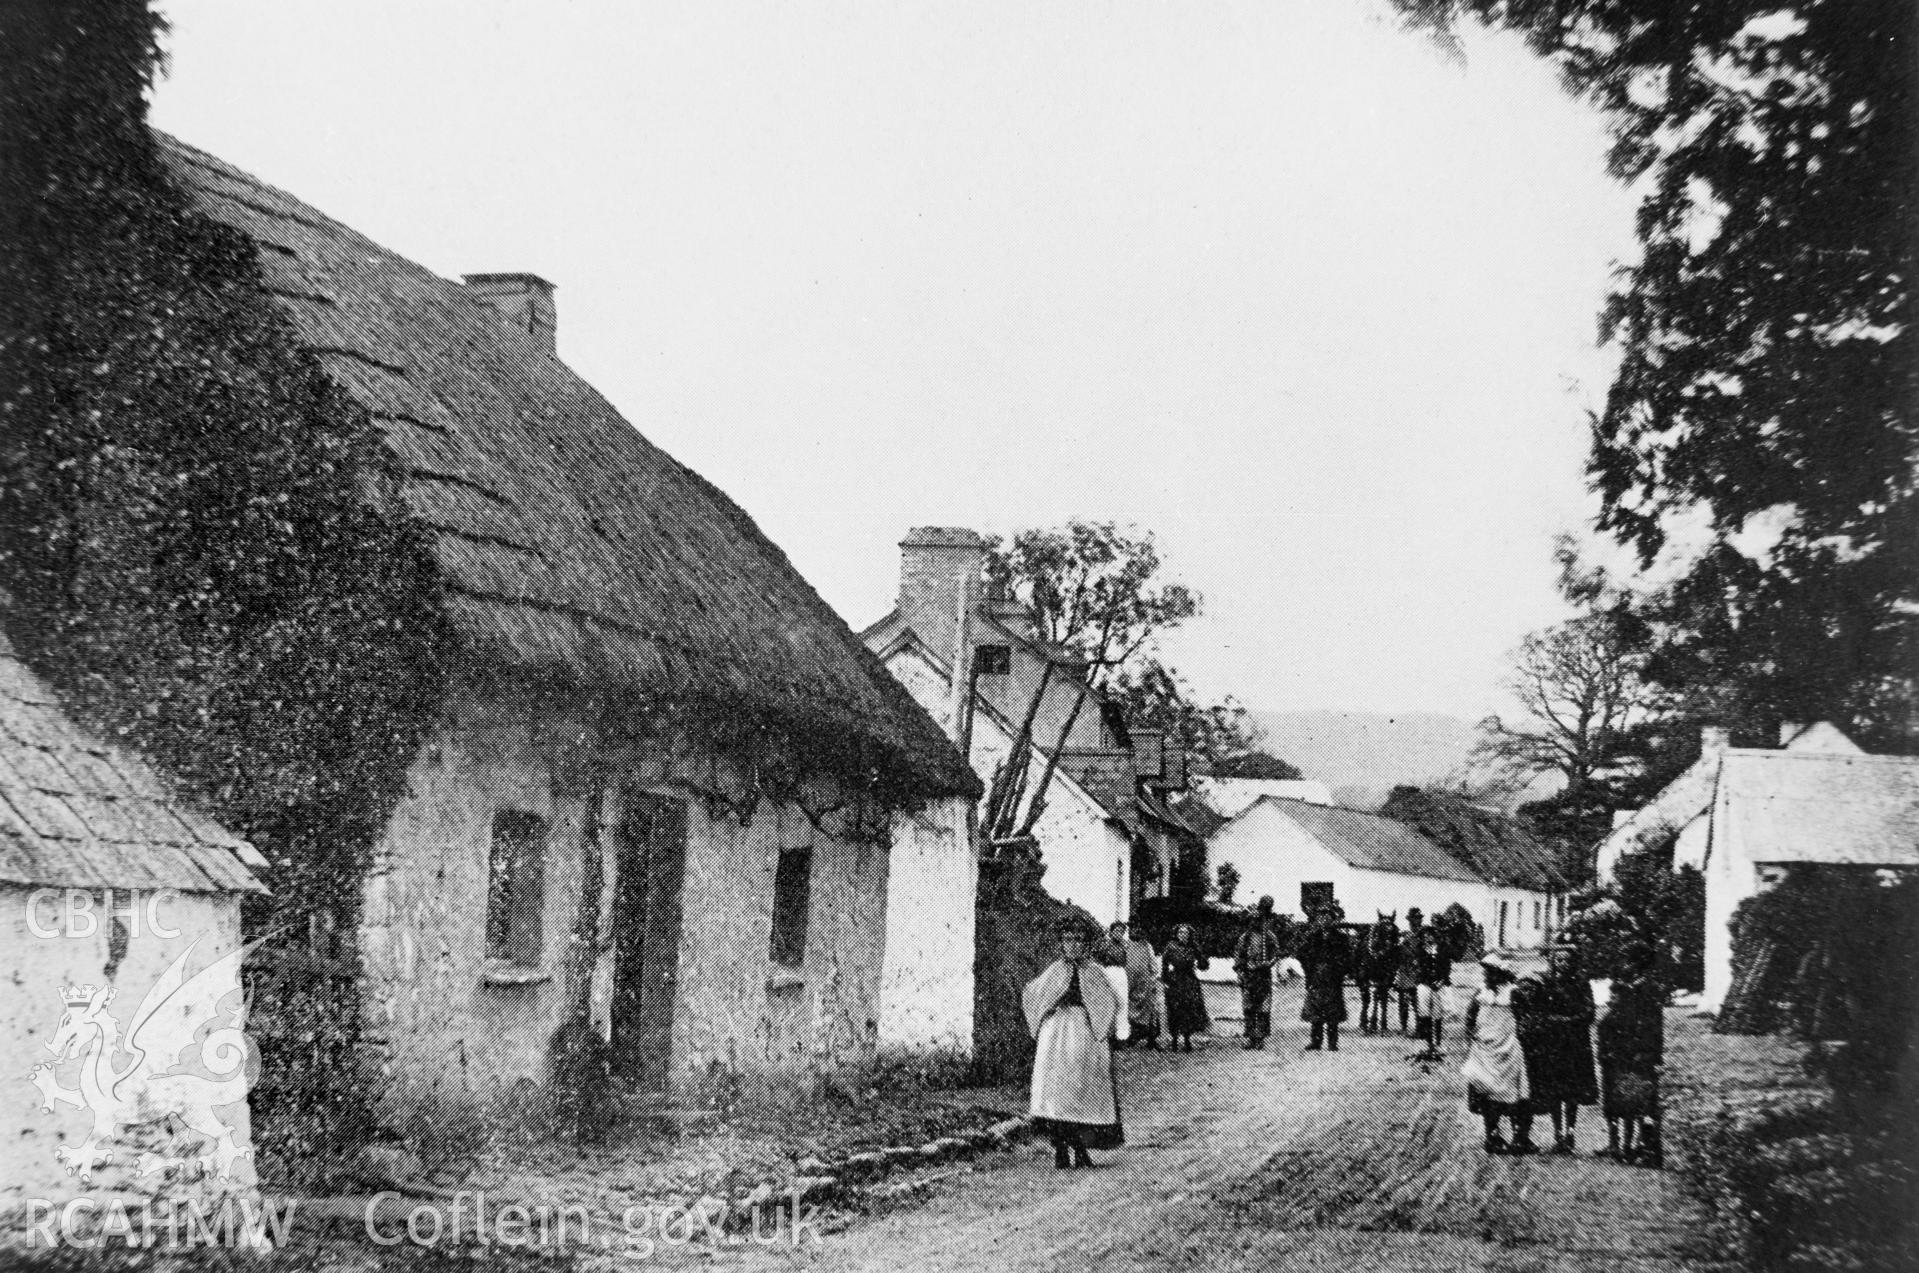 Copy of black and white image of Talsarn Village, Nantcwmlle, copied from early photograph showing cottages and figures, loaned by David Williams.